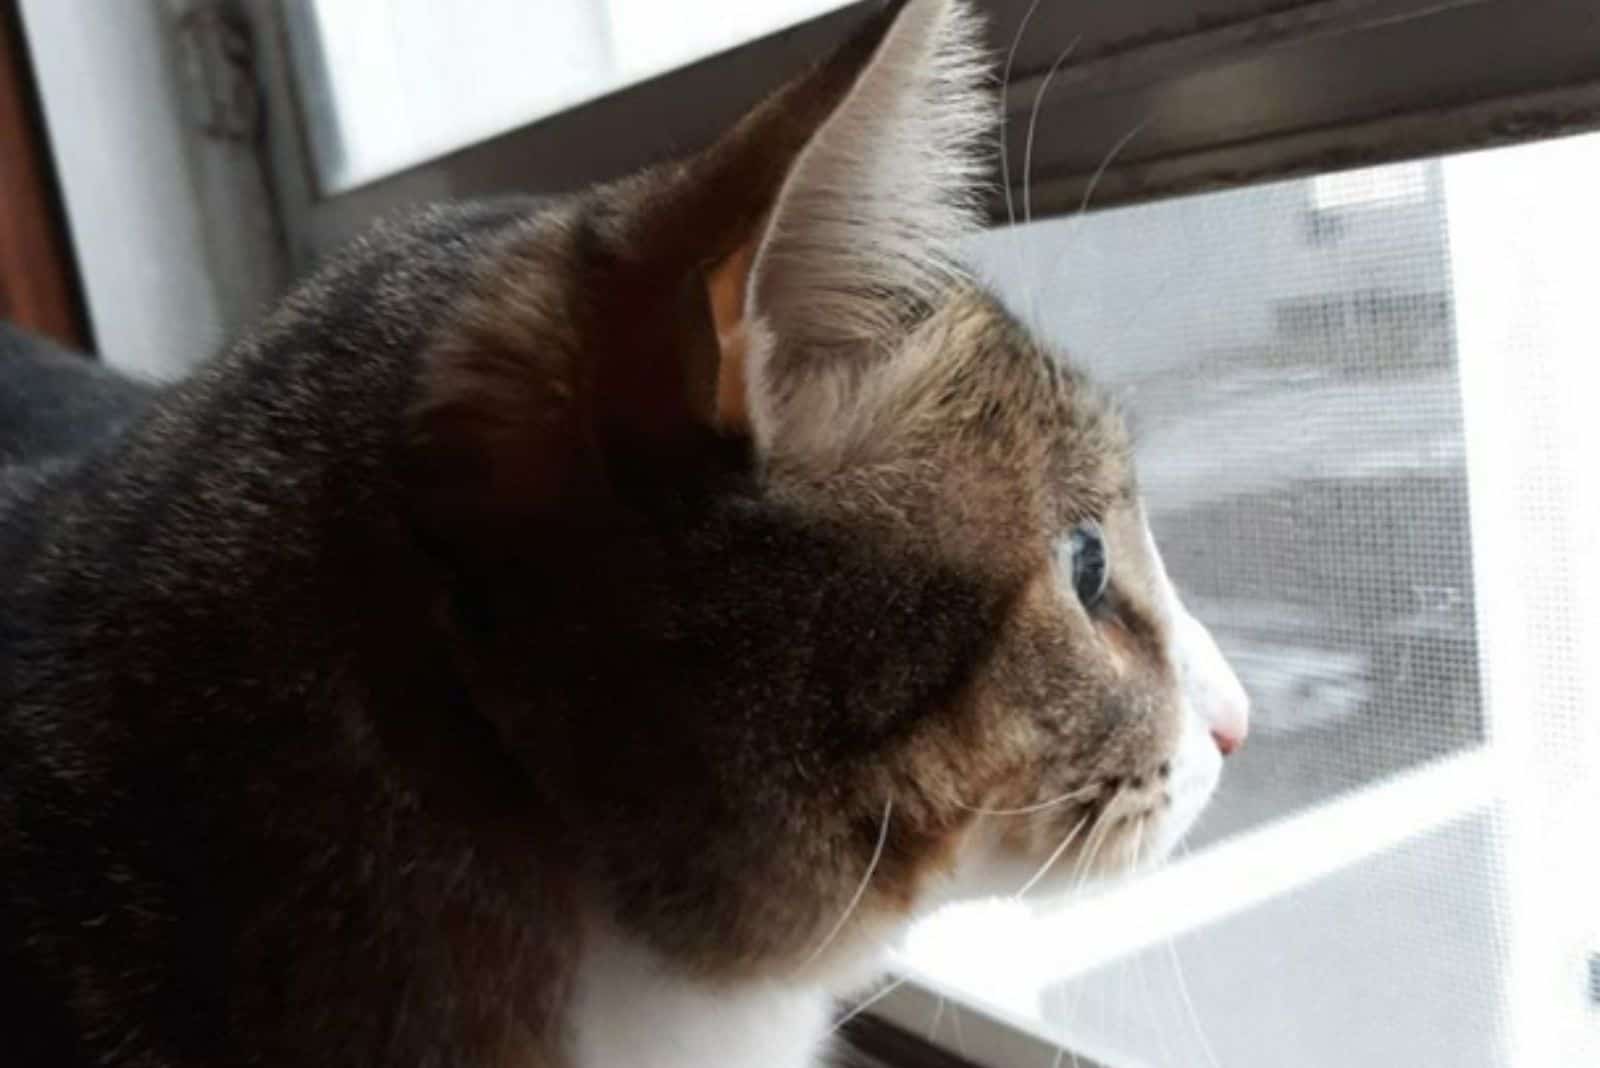 photo of a cat named Dibs watching snow outside